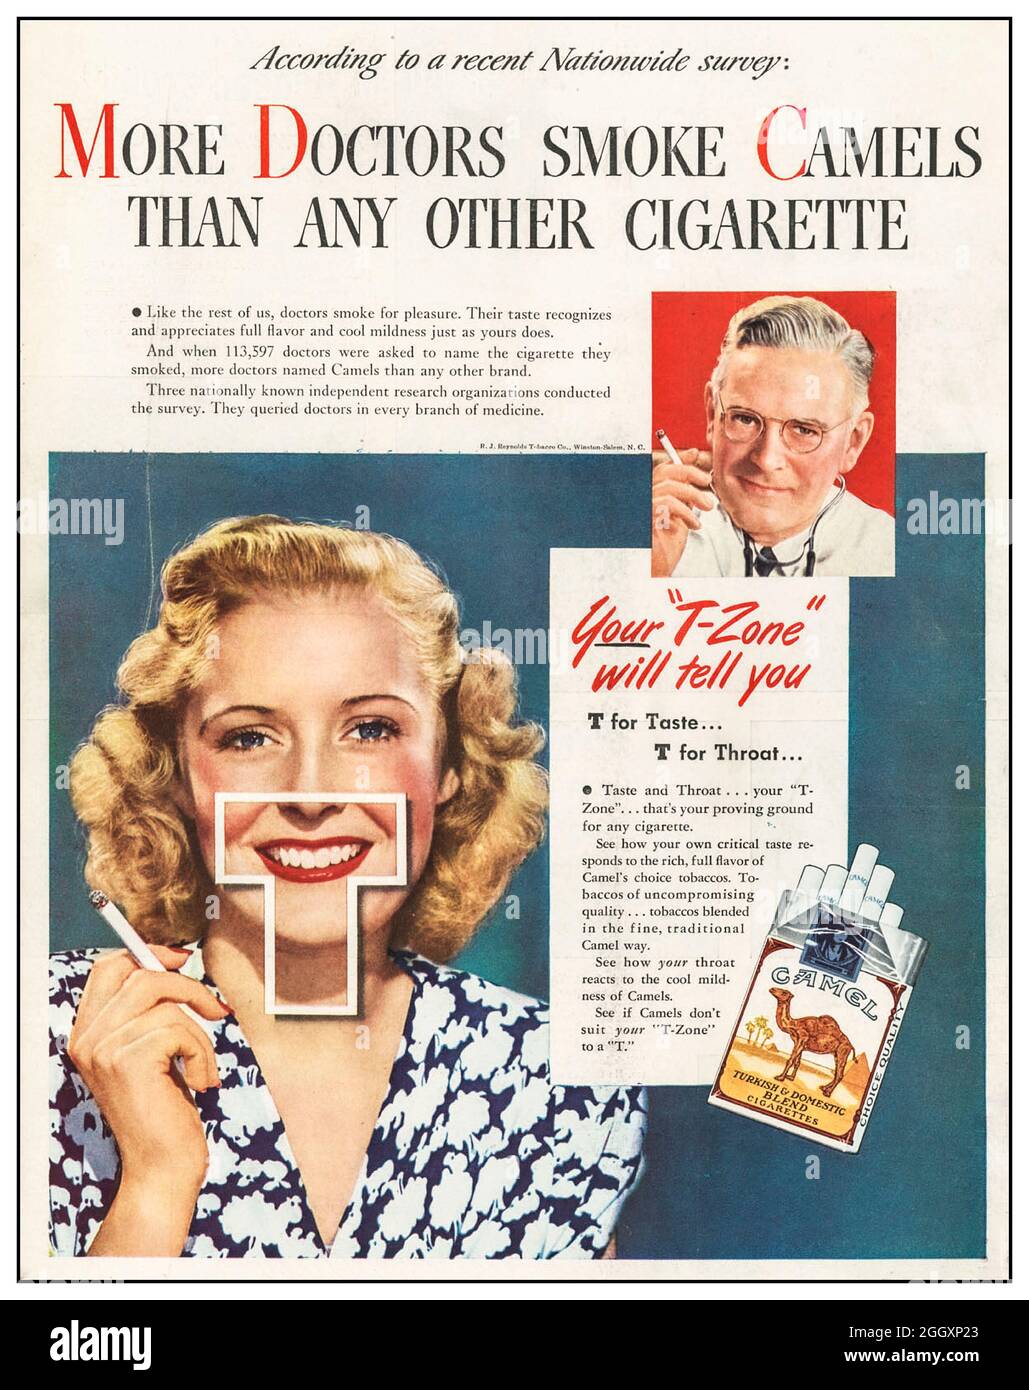 1950s-vintage-cigarette-advertising-for-camel-cigarettes-with-a-product-endorsement-by-a-doctor-more-doctors-smoke-camels-than-any-other-cigarette-america-usa-2GGXP23.jpg